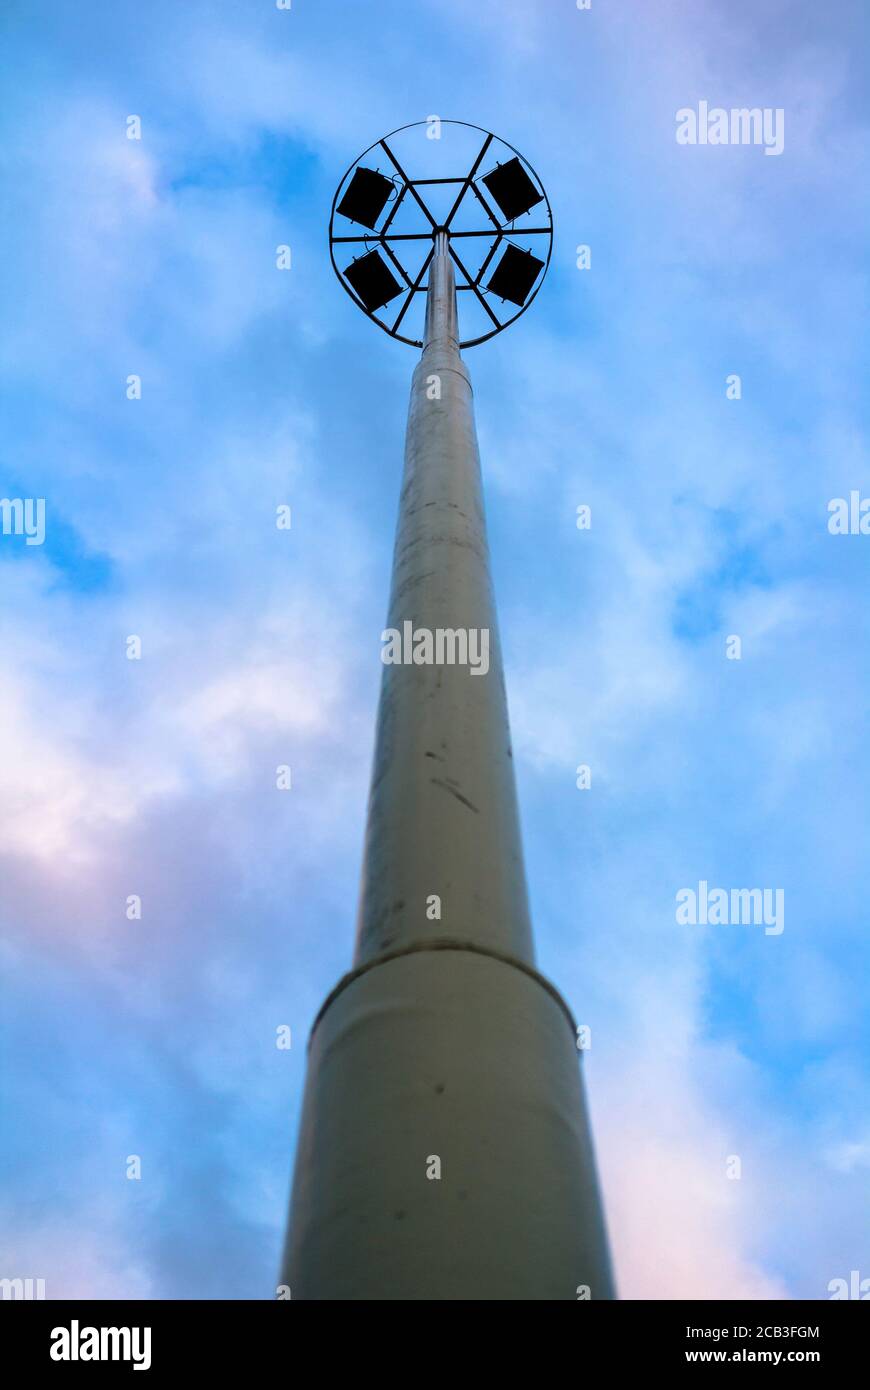 Round and circle with reflectors on the pillar. Blue sky with clouds as copy space Stock Photo